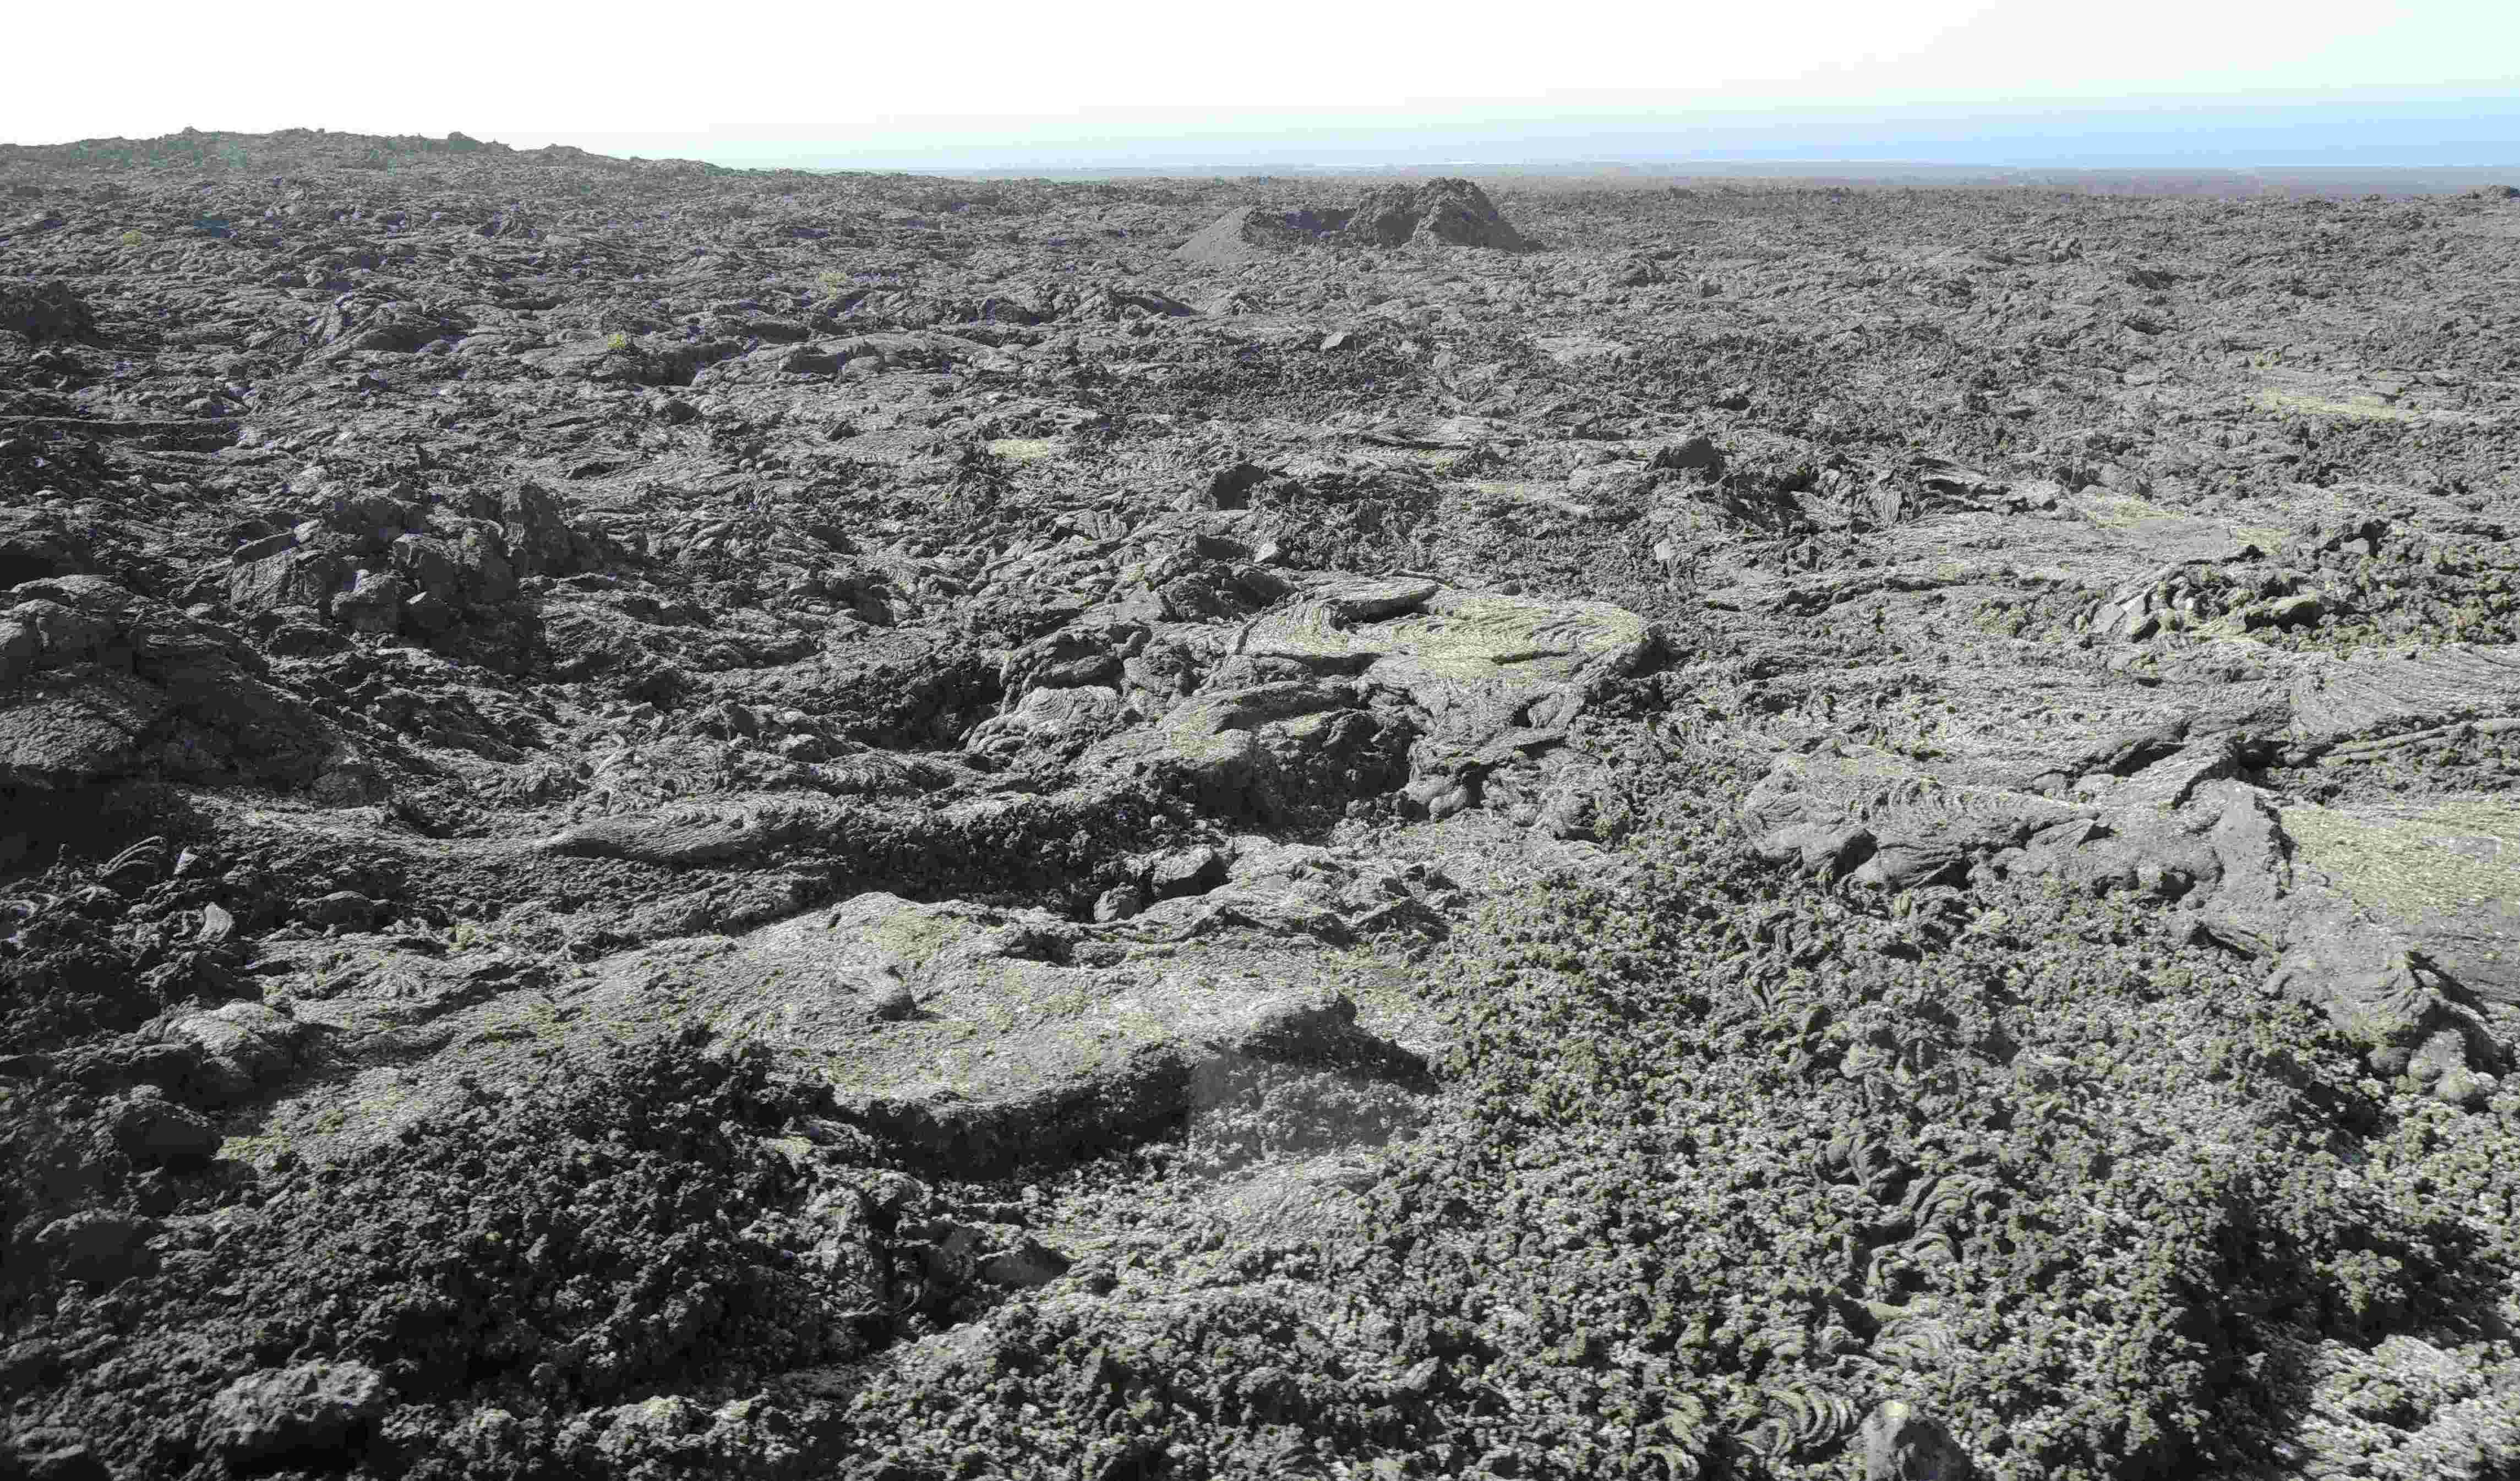 A desert with lots of lava rock